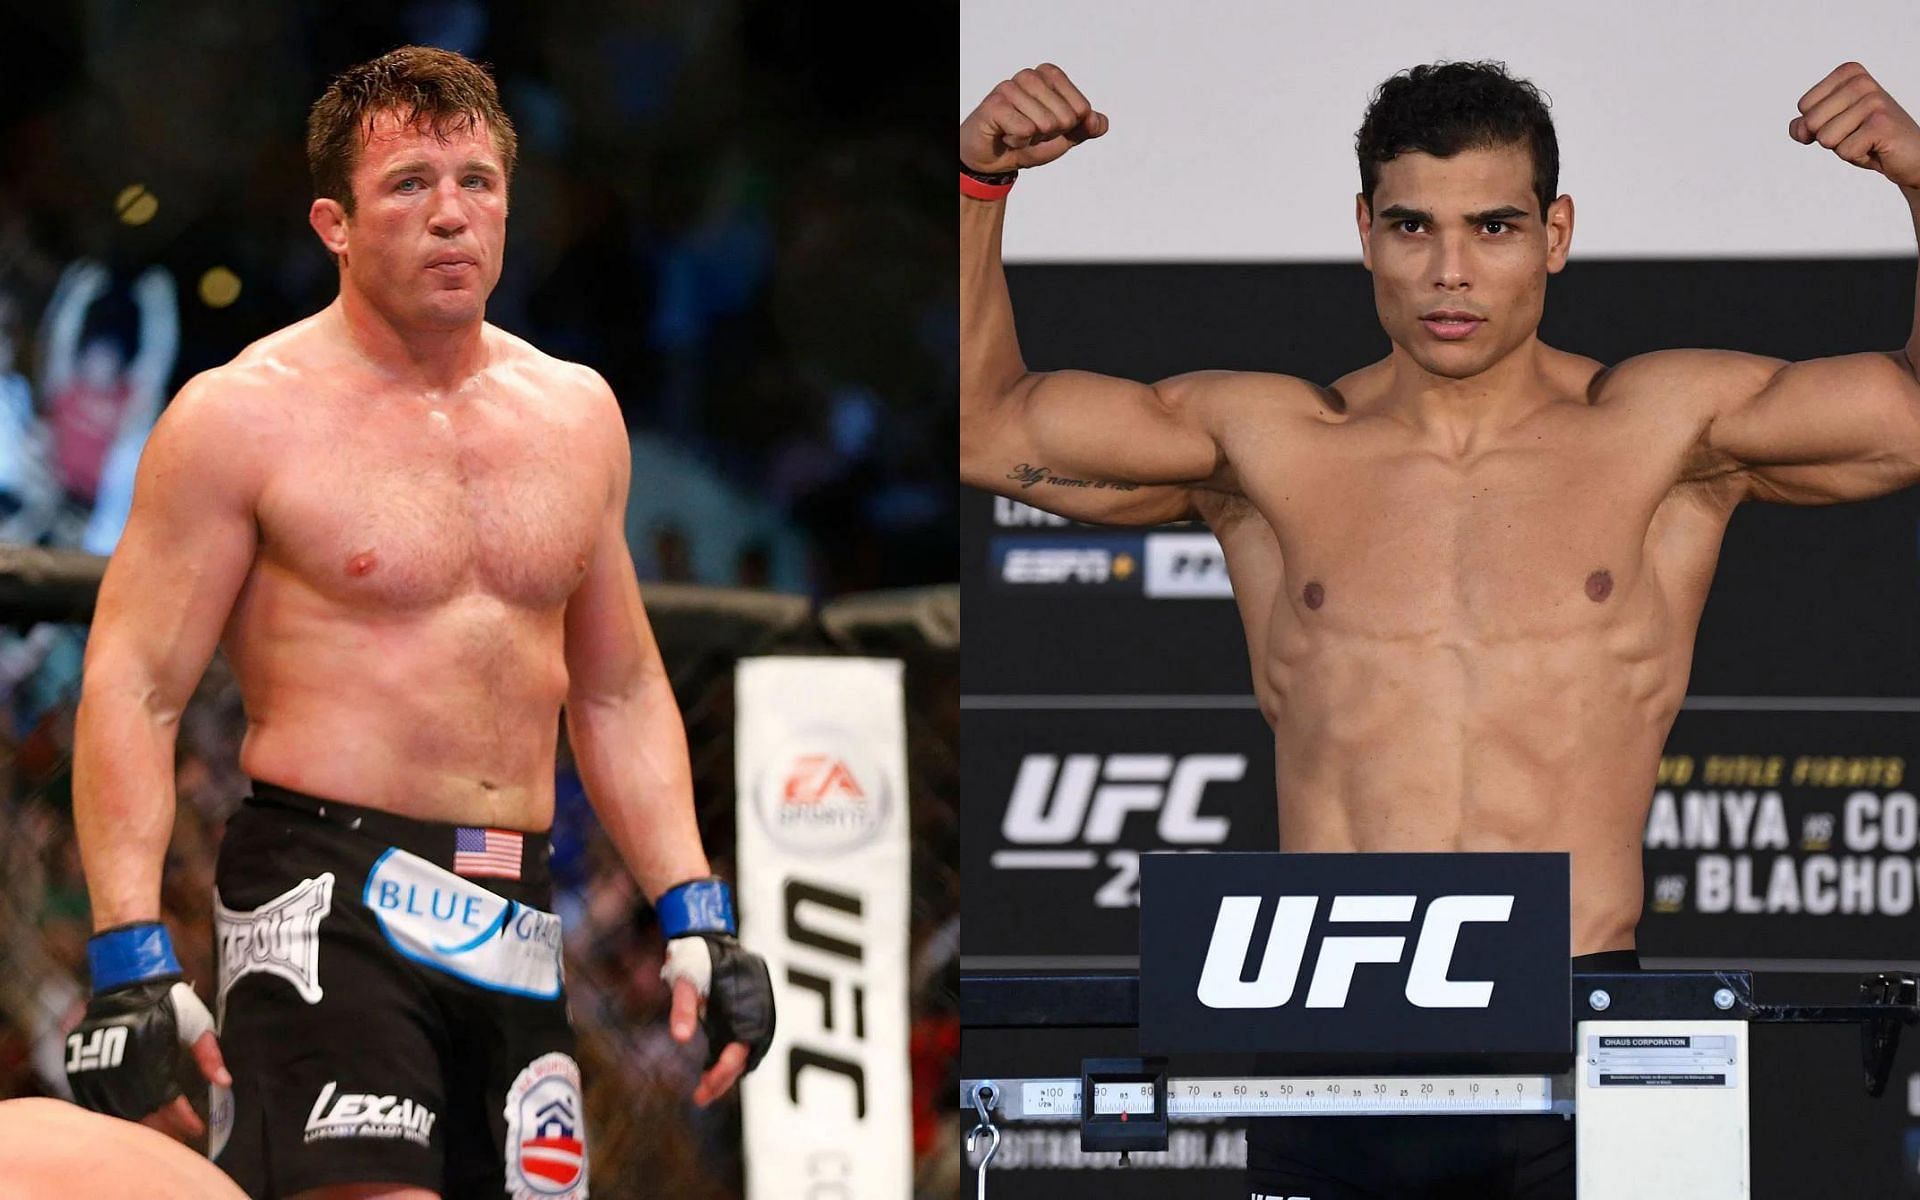 Chael Sonnen (left) thinks that Paulo Costa (right) will do well at light heavyweight